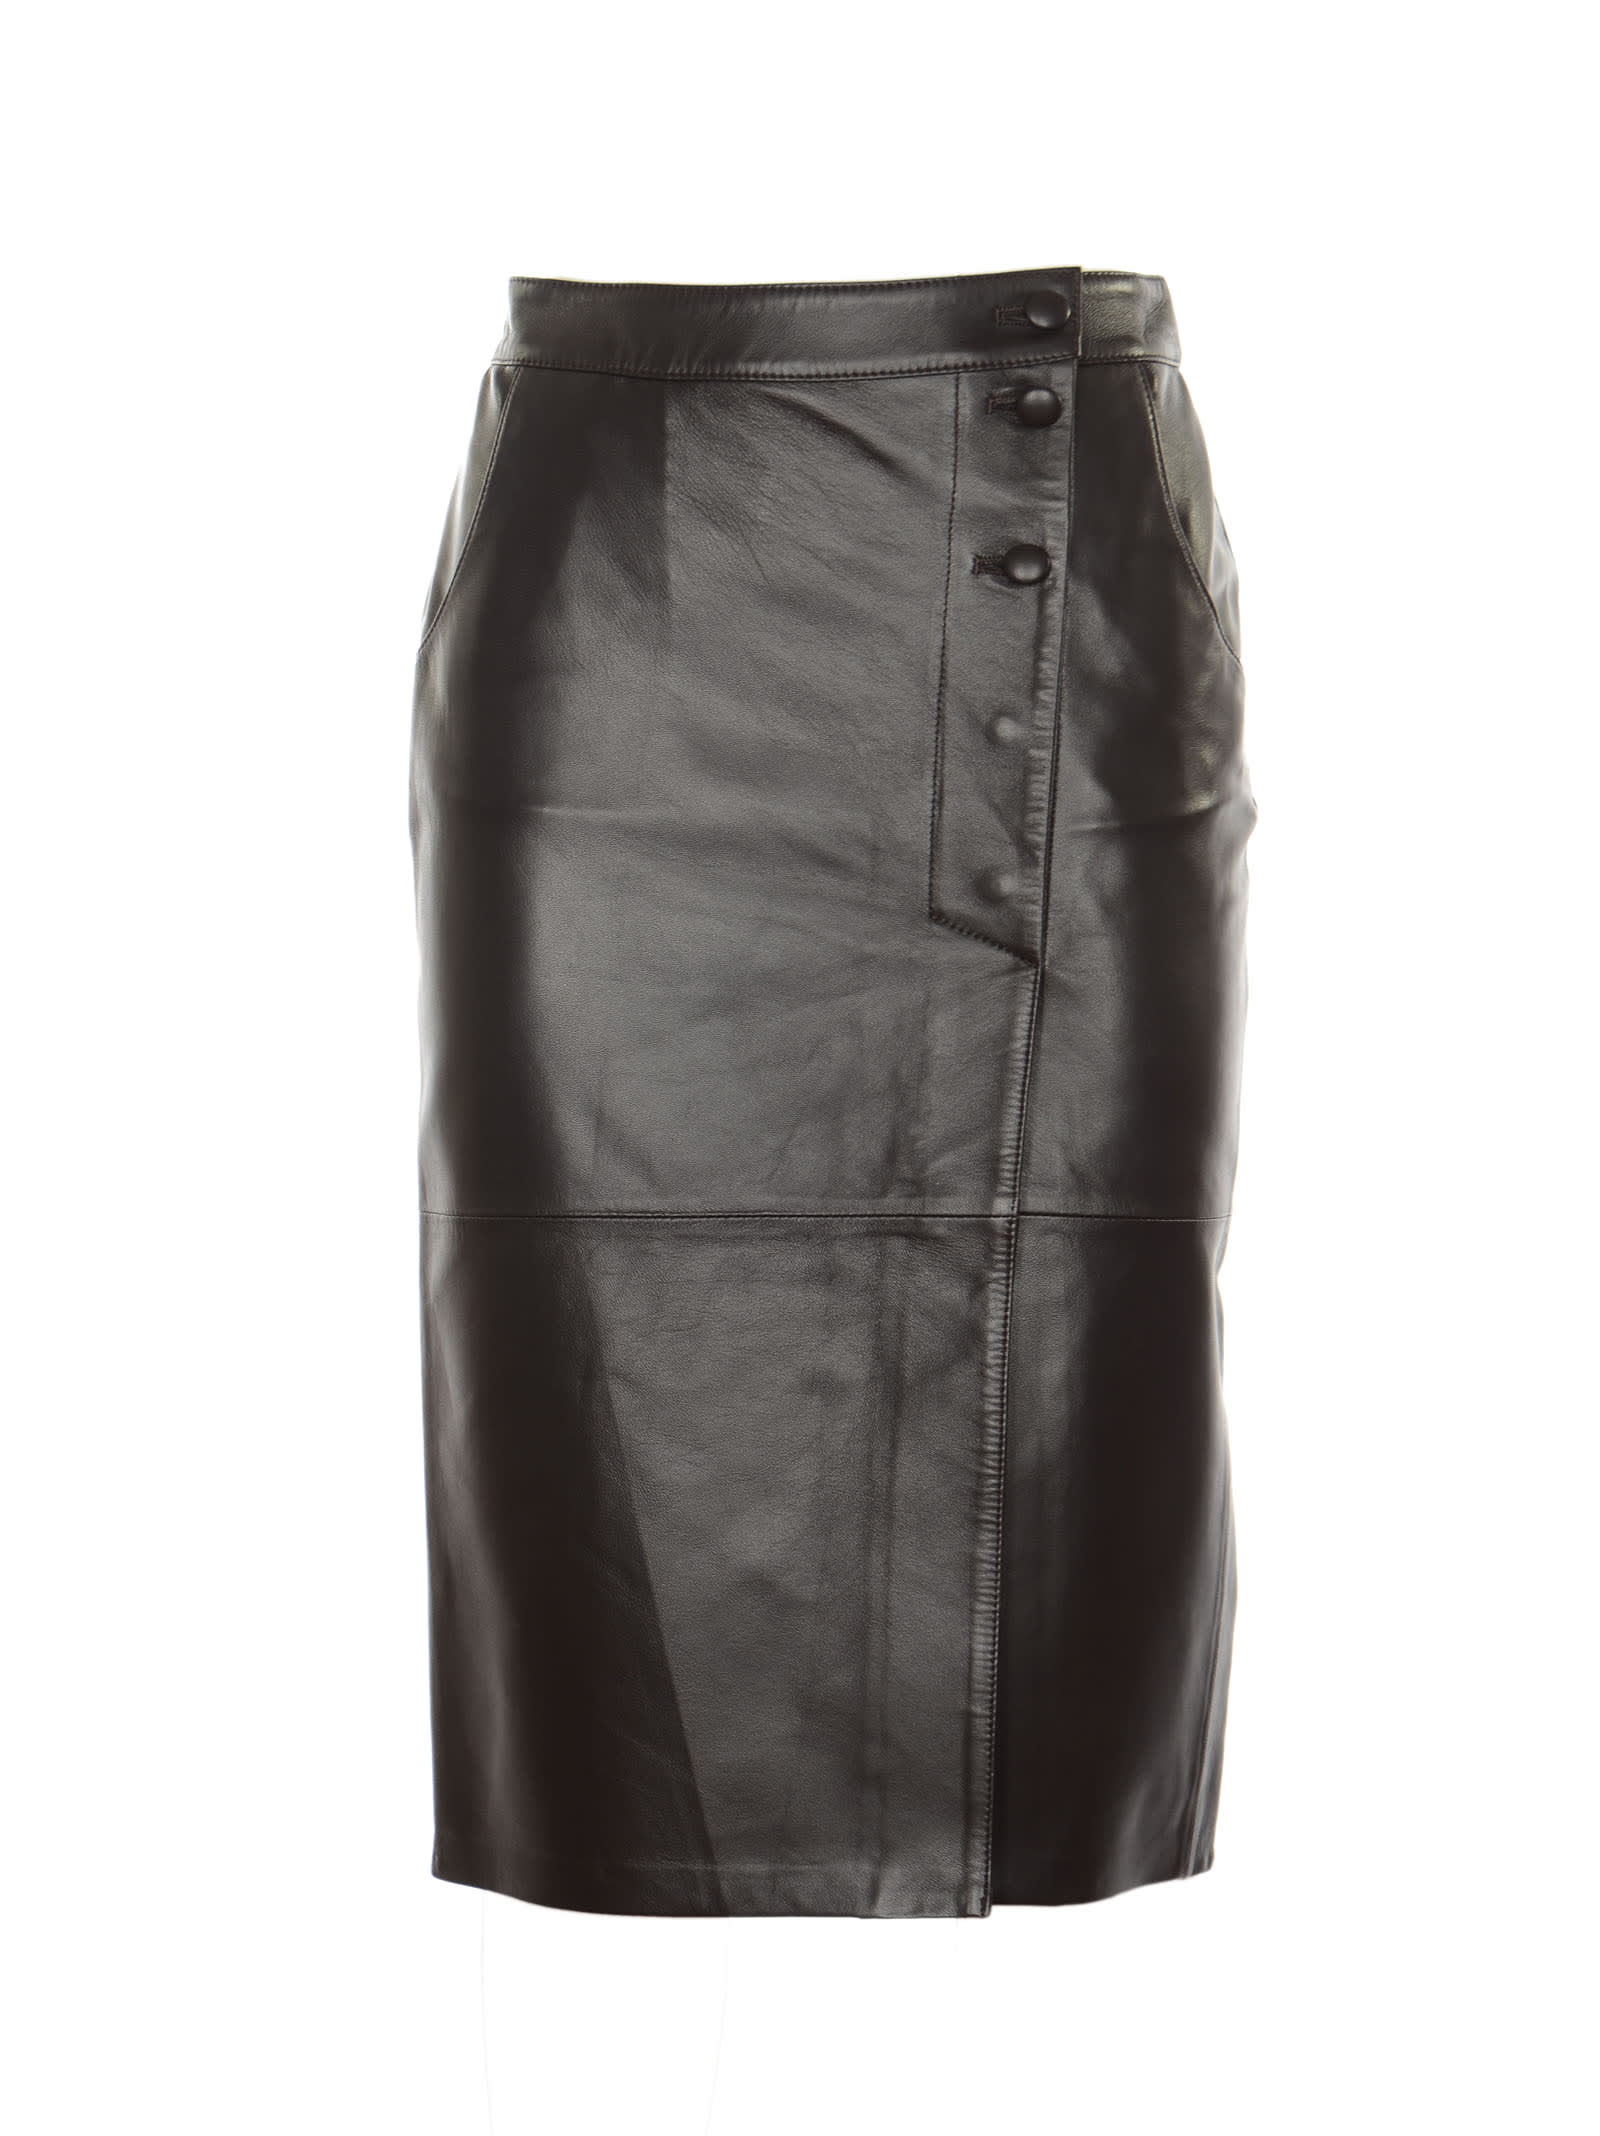 Federica Tosi Side Buttoned Skirt